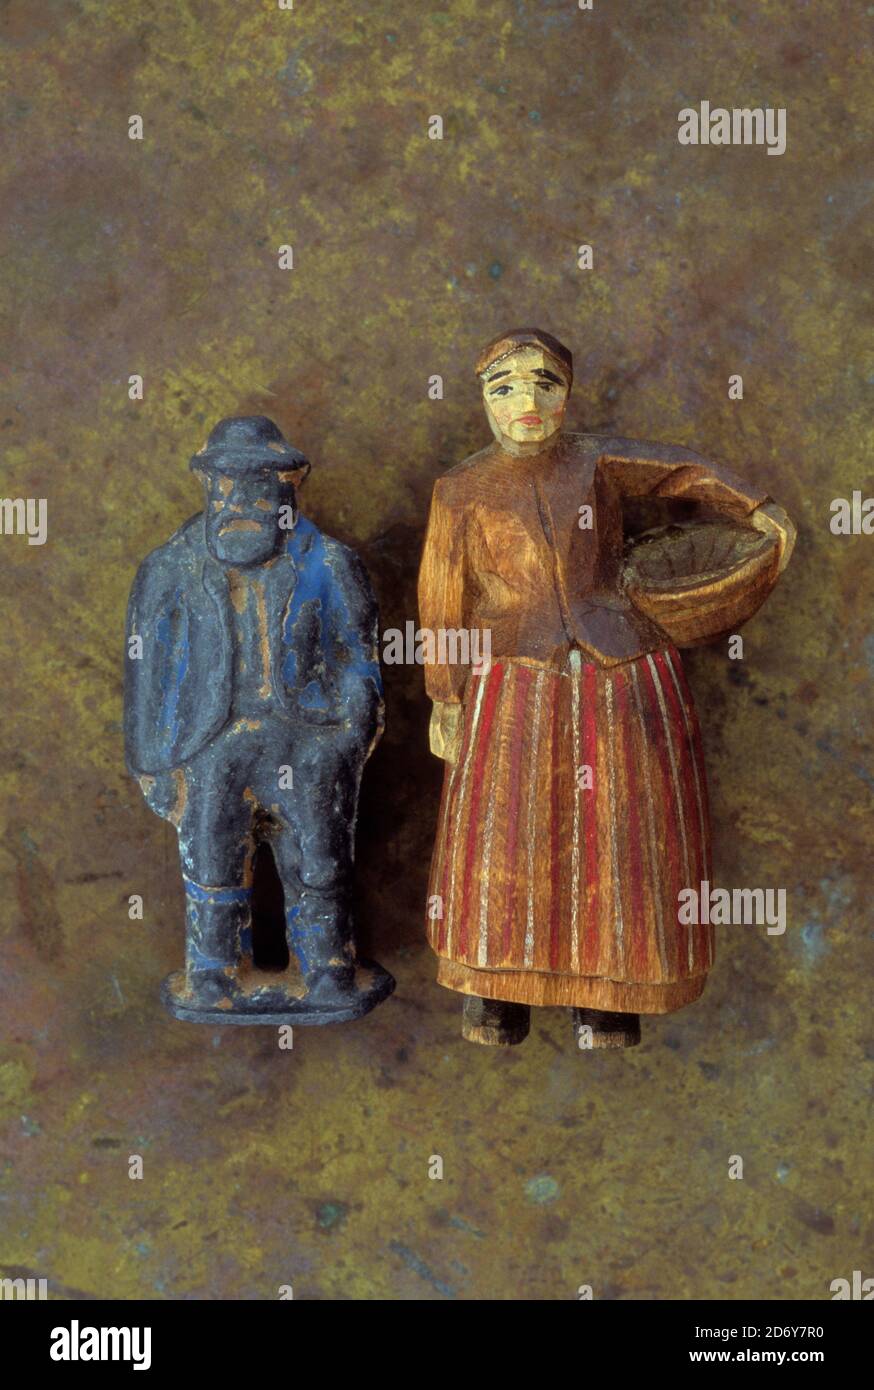 Vintage naive carved and painted wooden model of farm woman in long skirt holding bowl for feeding chickens standing next to grumpy farmer Stock Photo